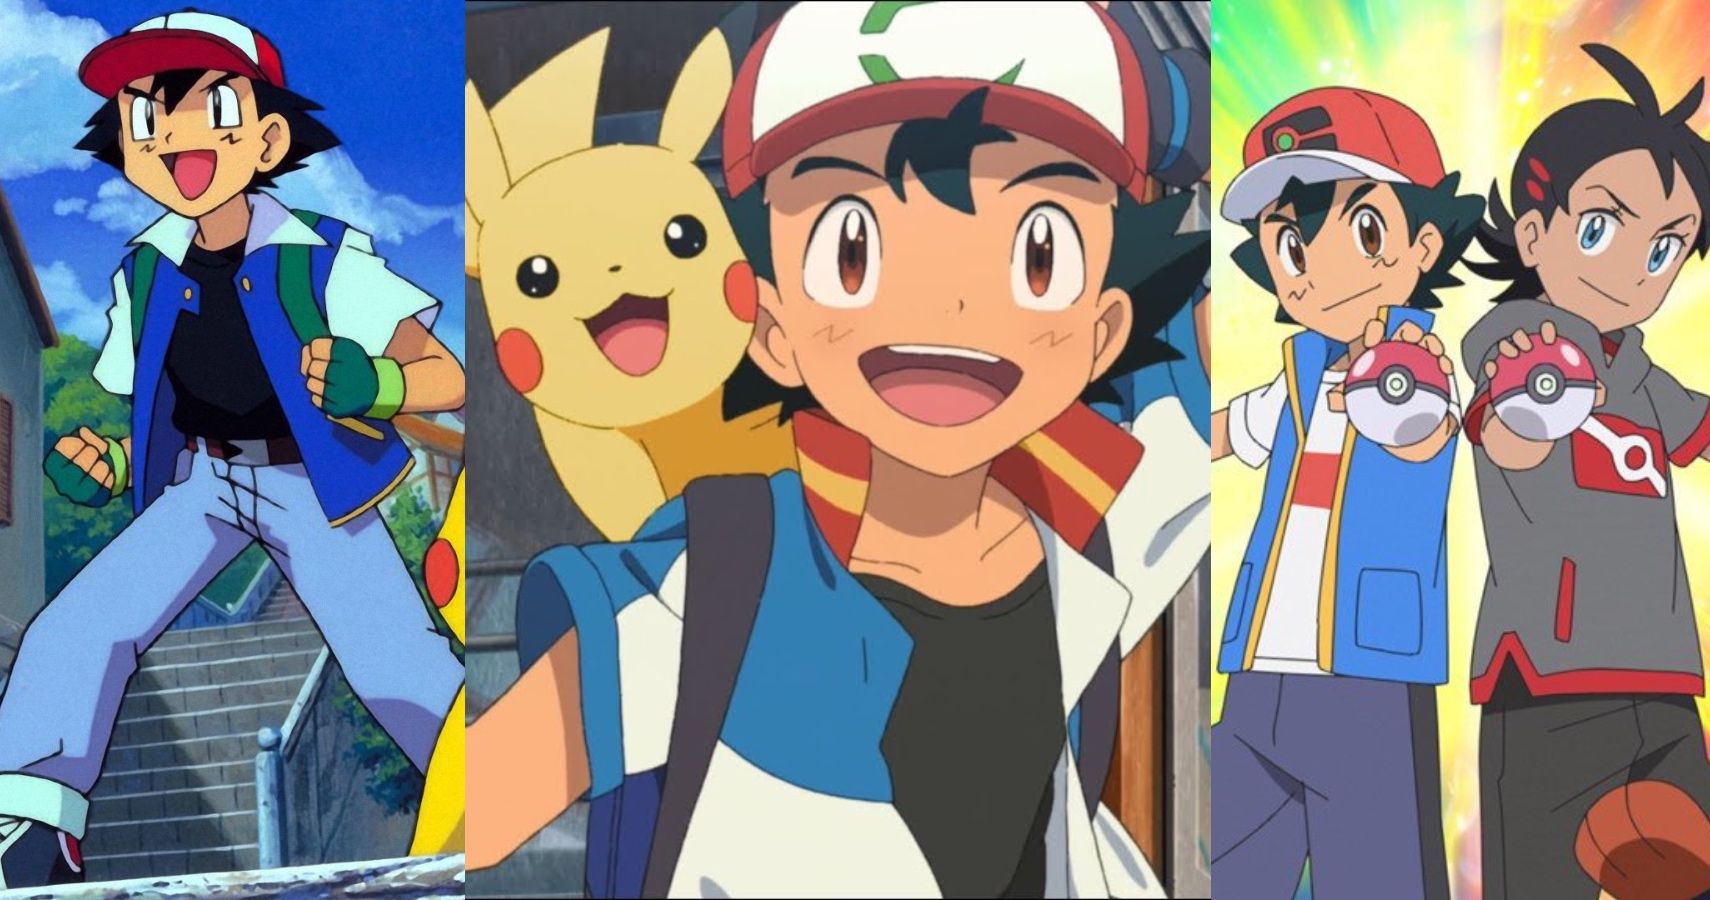 lof Wind In de genade van Pokemon: Every One of Ash's Main Outfits From The Anime, Ranked